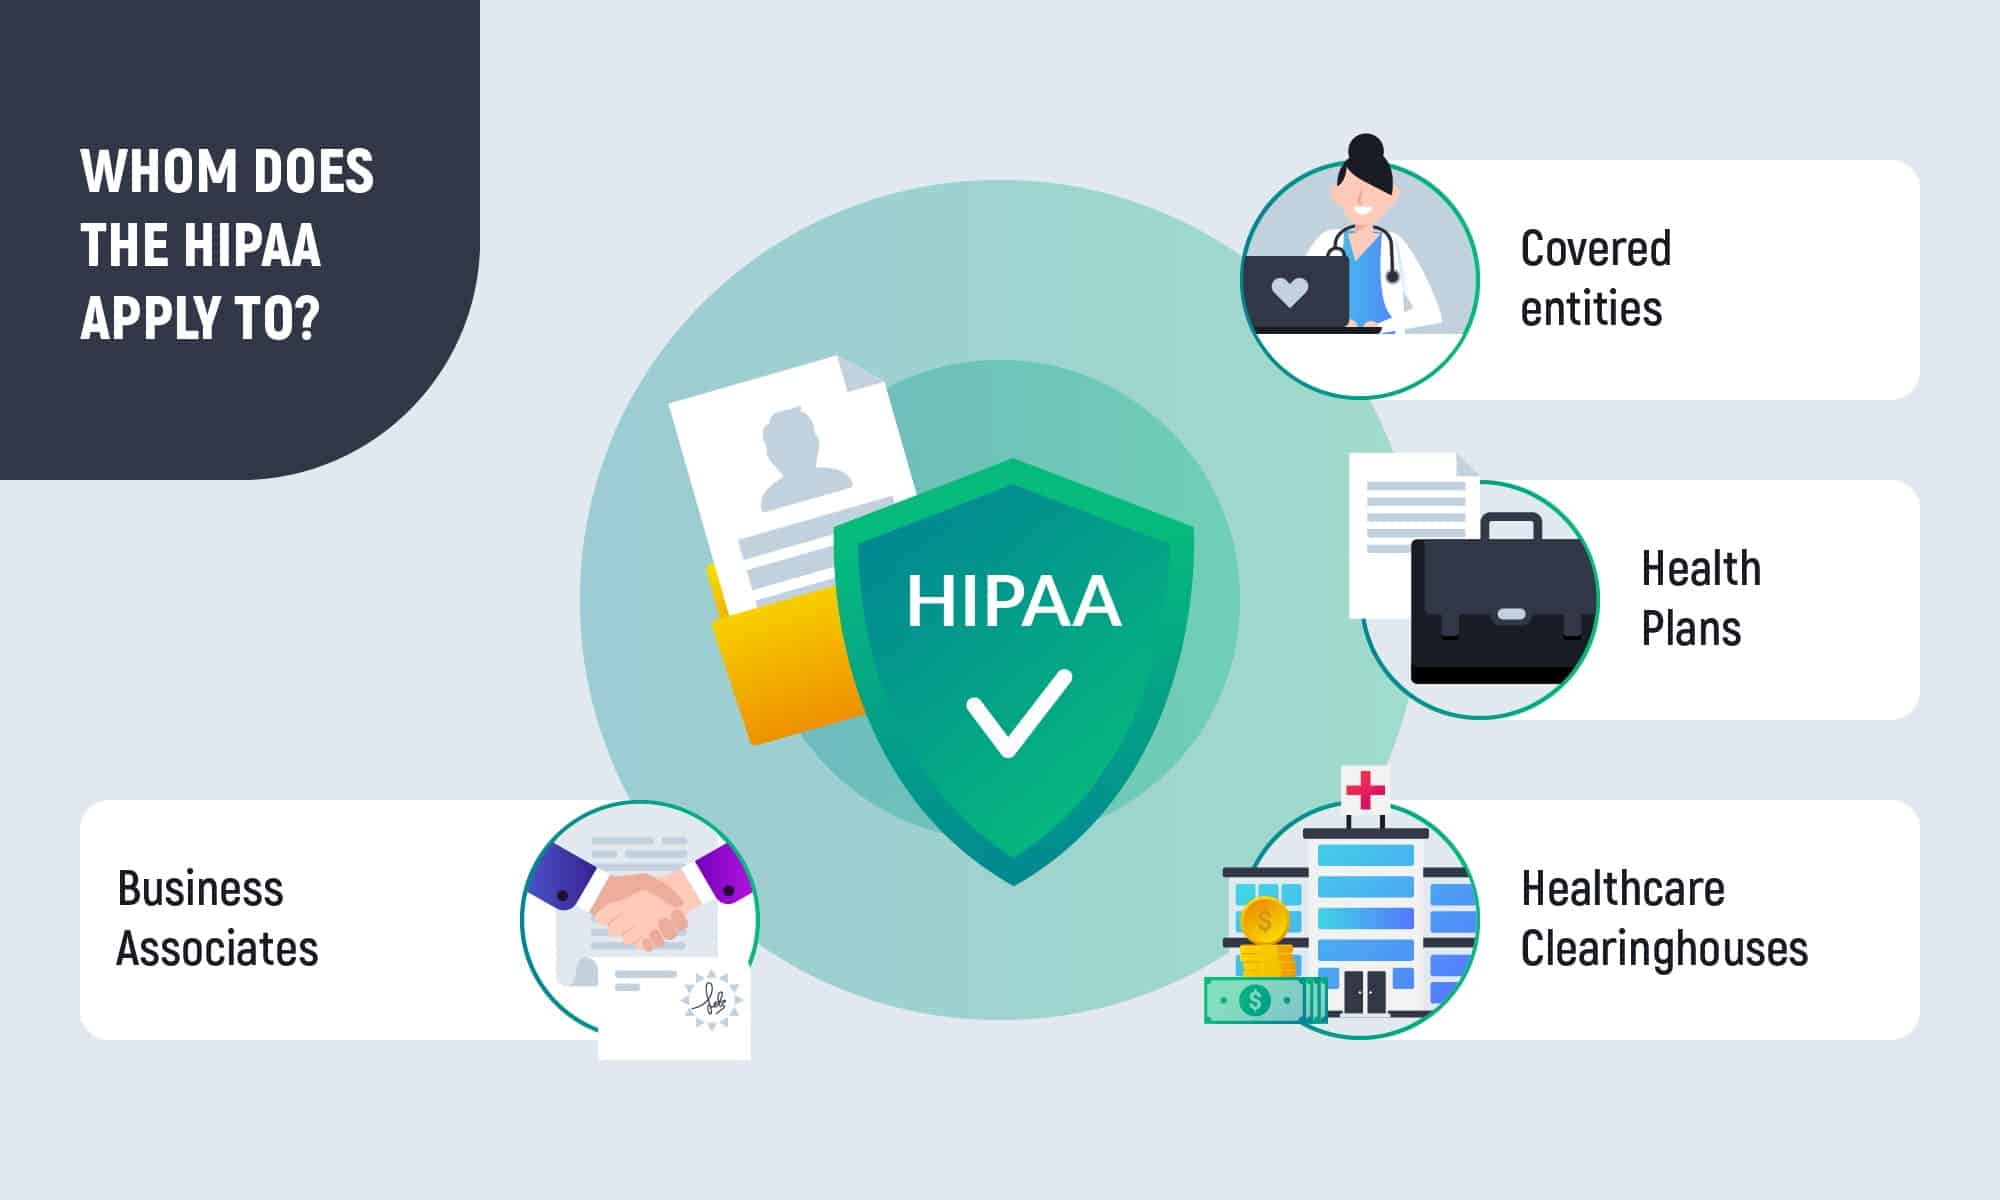 Whom does the HIPAA apply to?